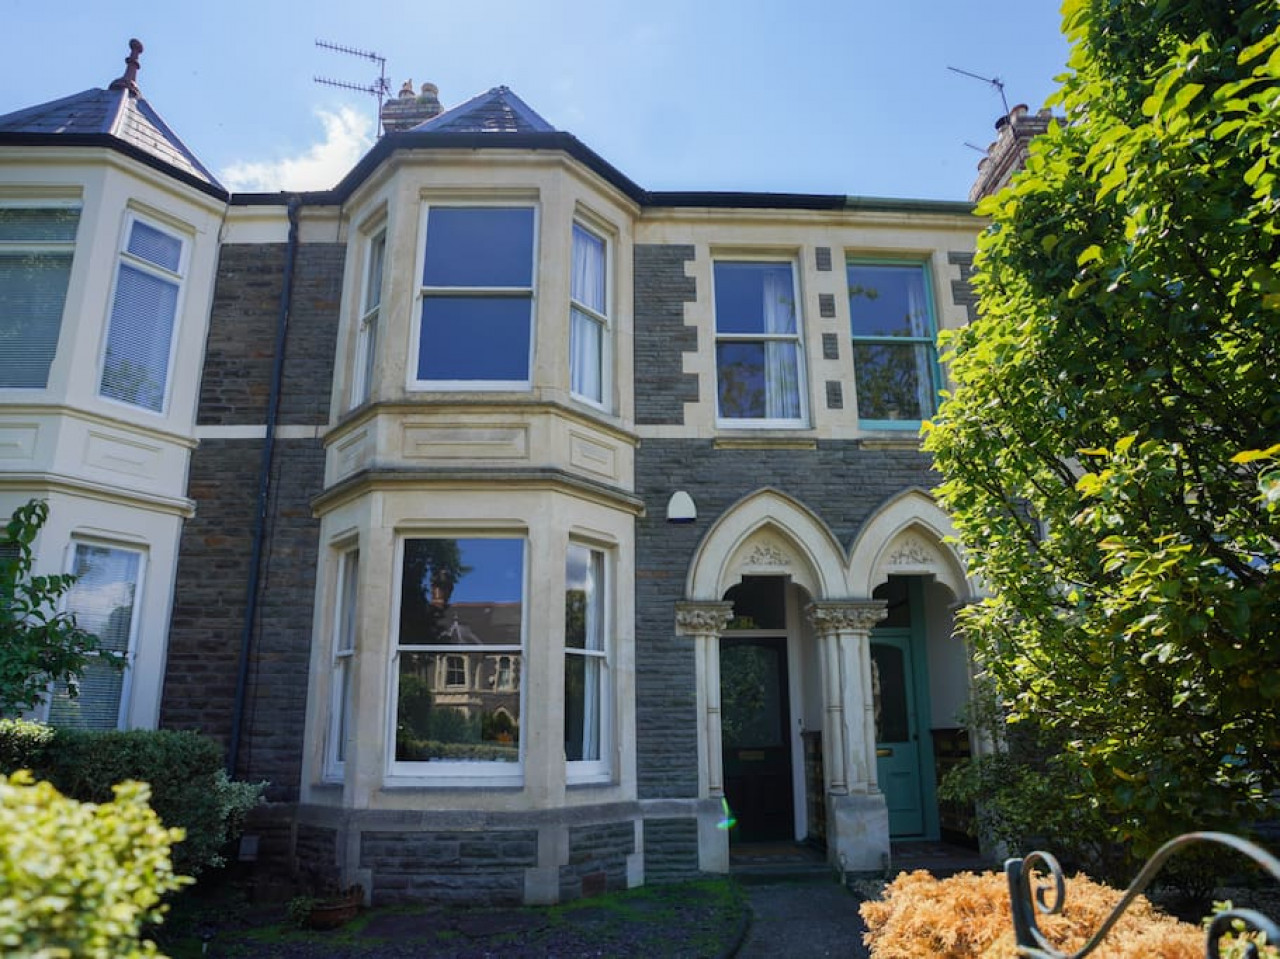 Spacious 4 Bedroom Character Home in Pontcanna!